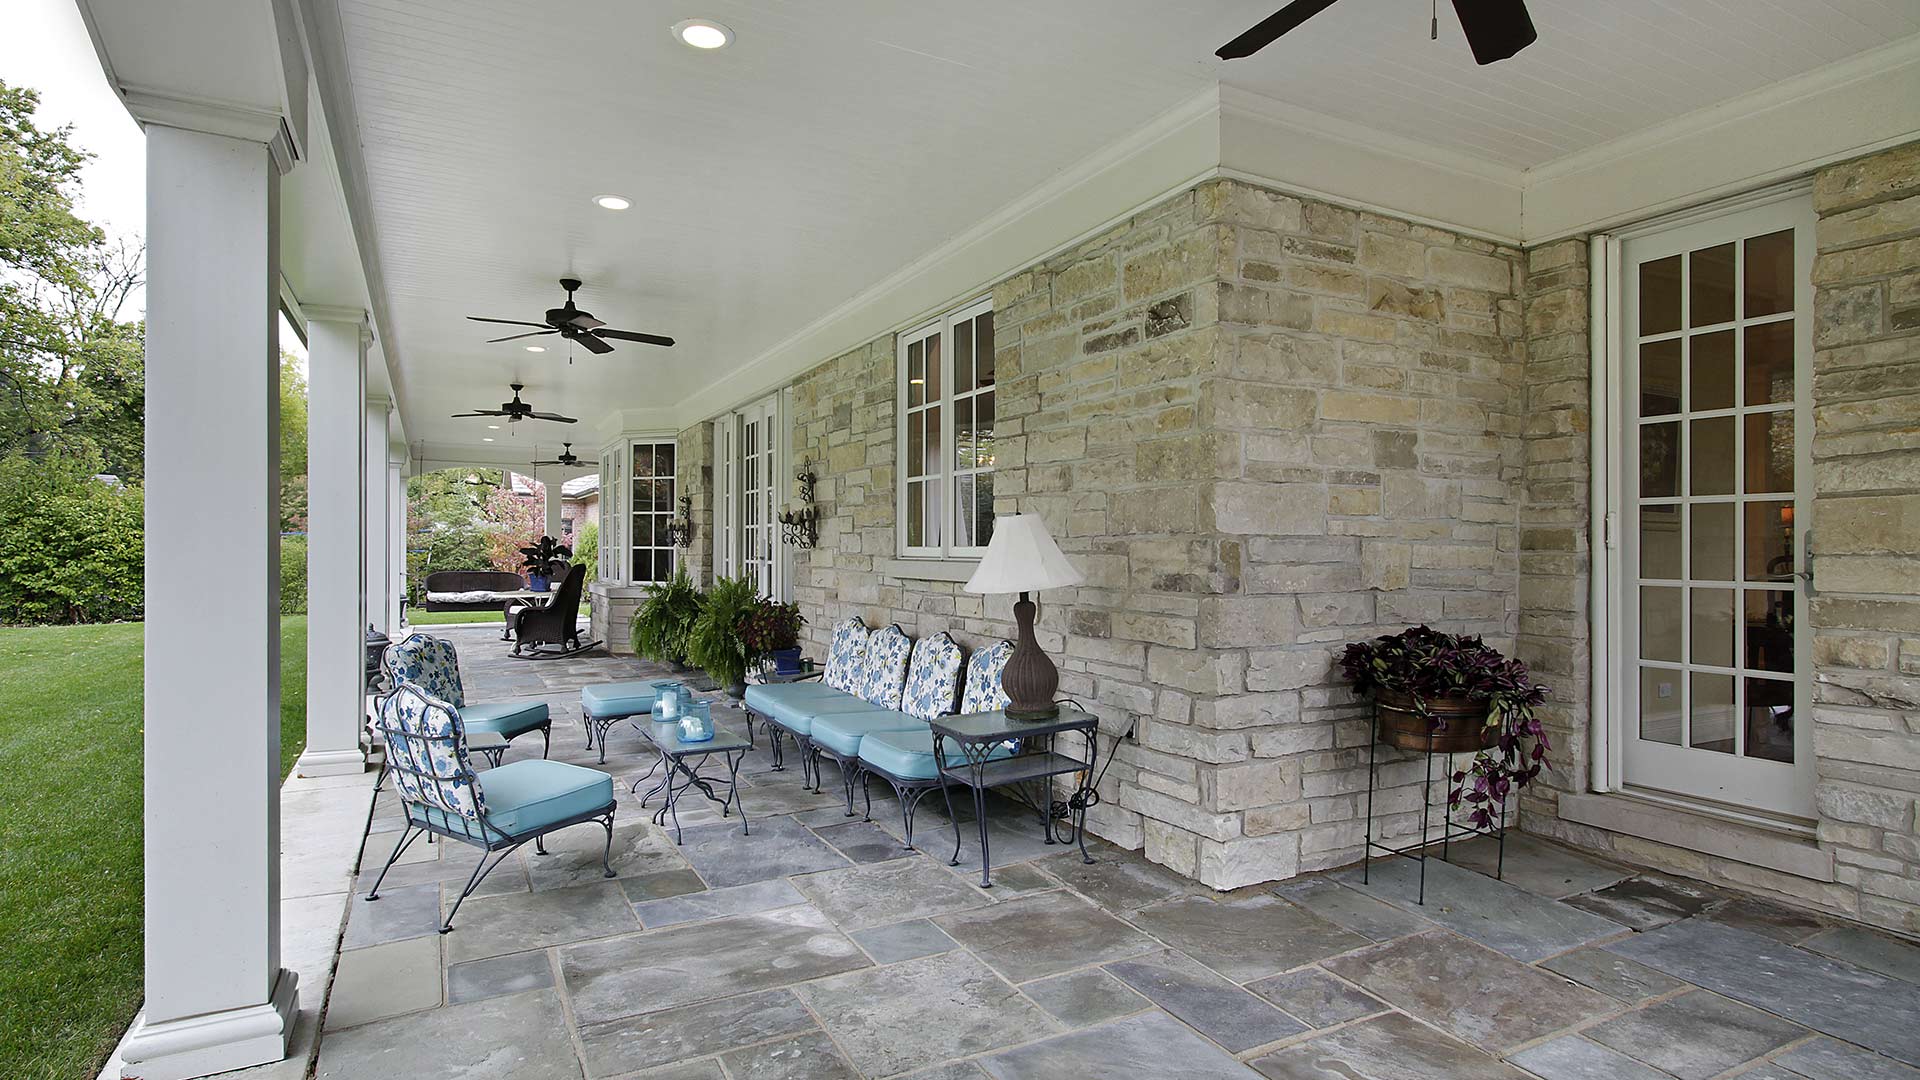 5 Eye-Catching Paver Patterns for Your Patio in Omaha!